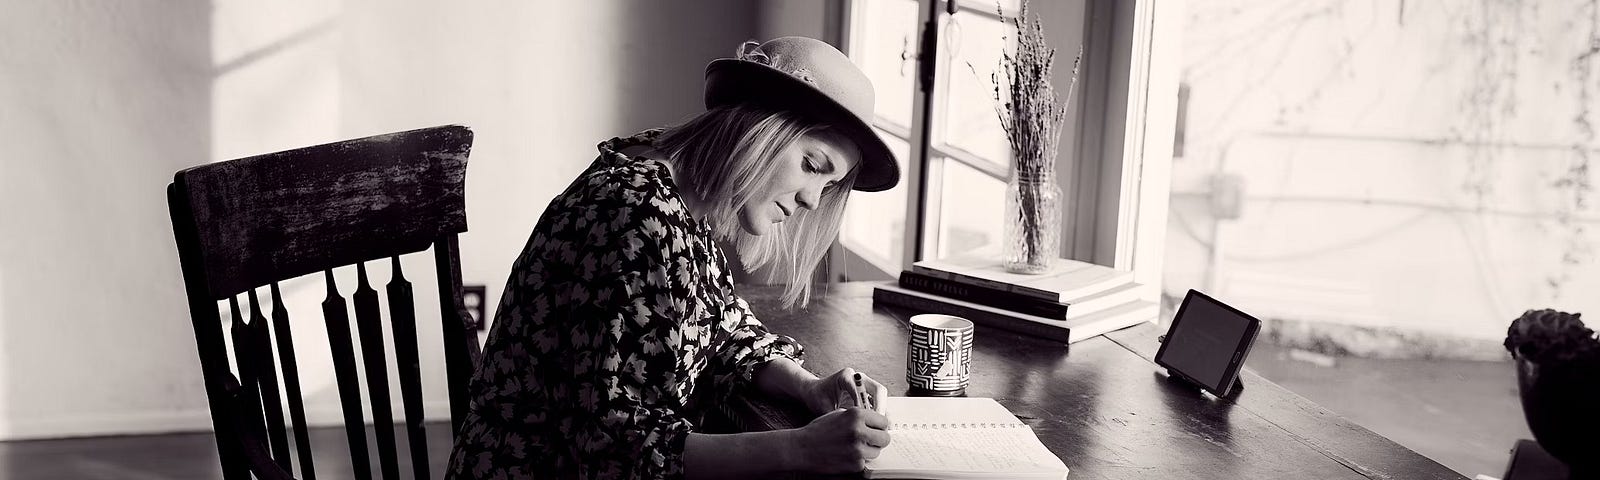 Black and white photo of woman sitting alone at table writing